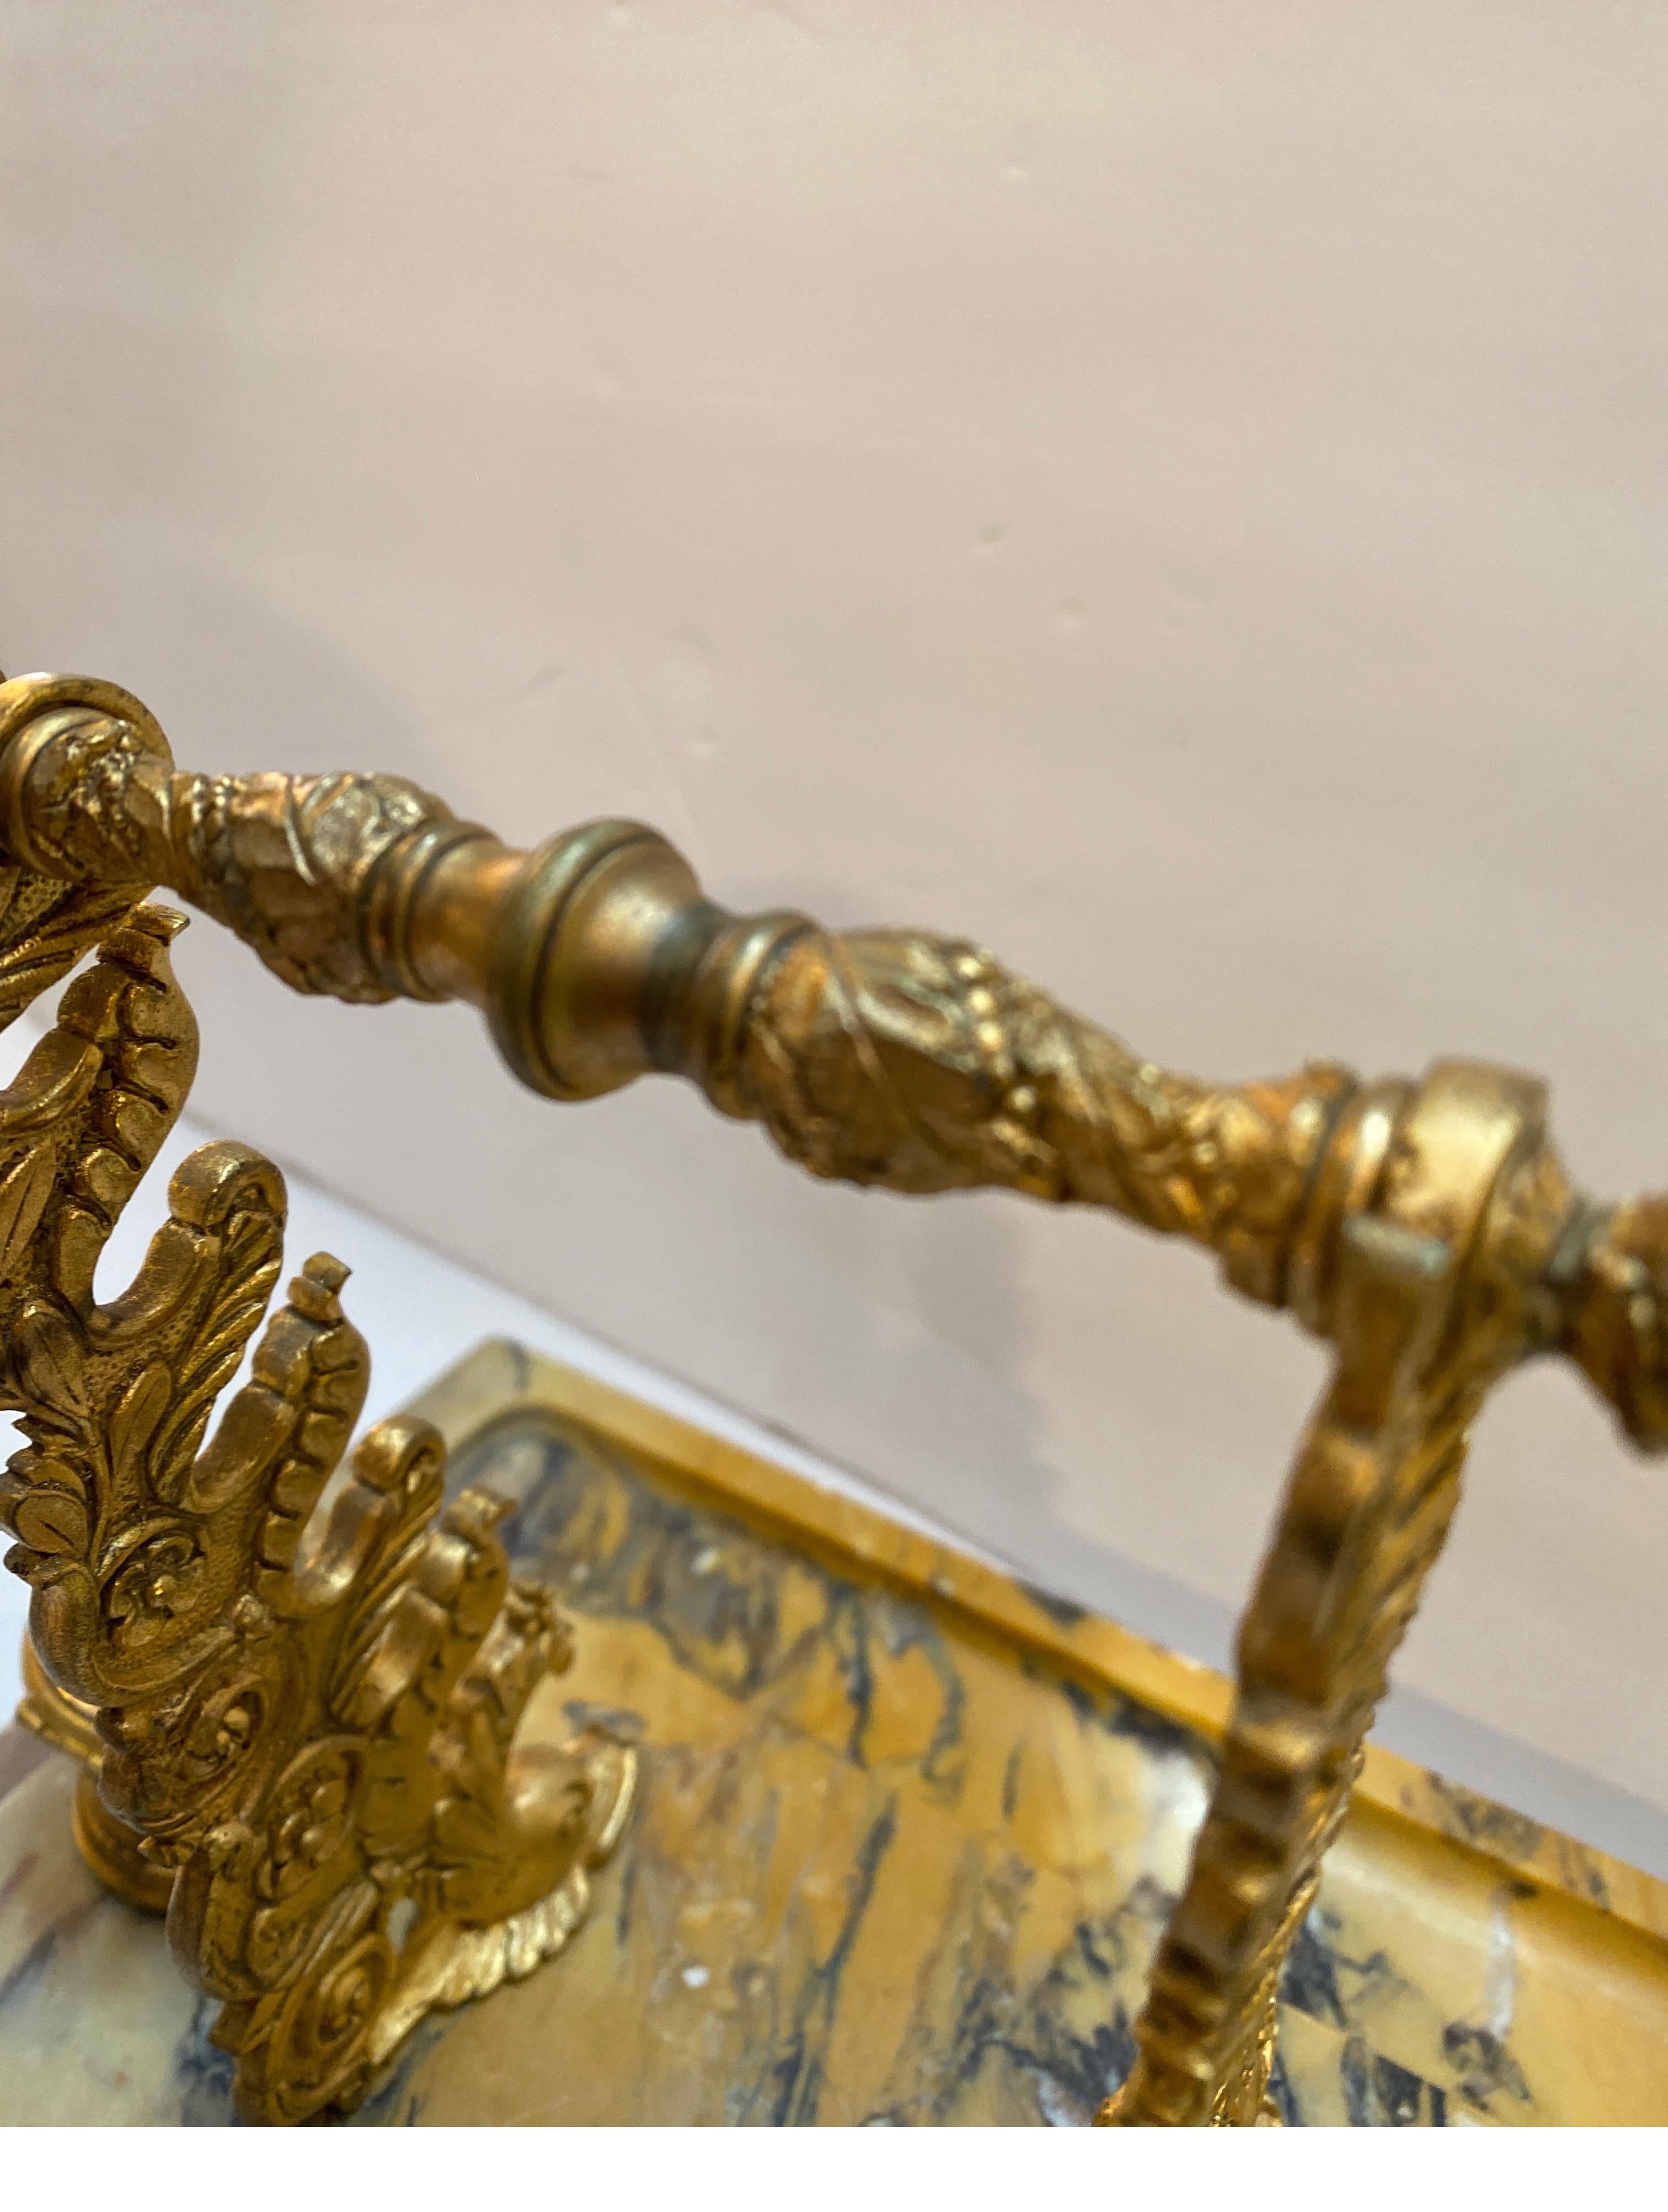 Siena Marble and Ormolu Double Inkstand Late 19th Century For Sale 5